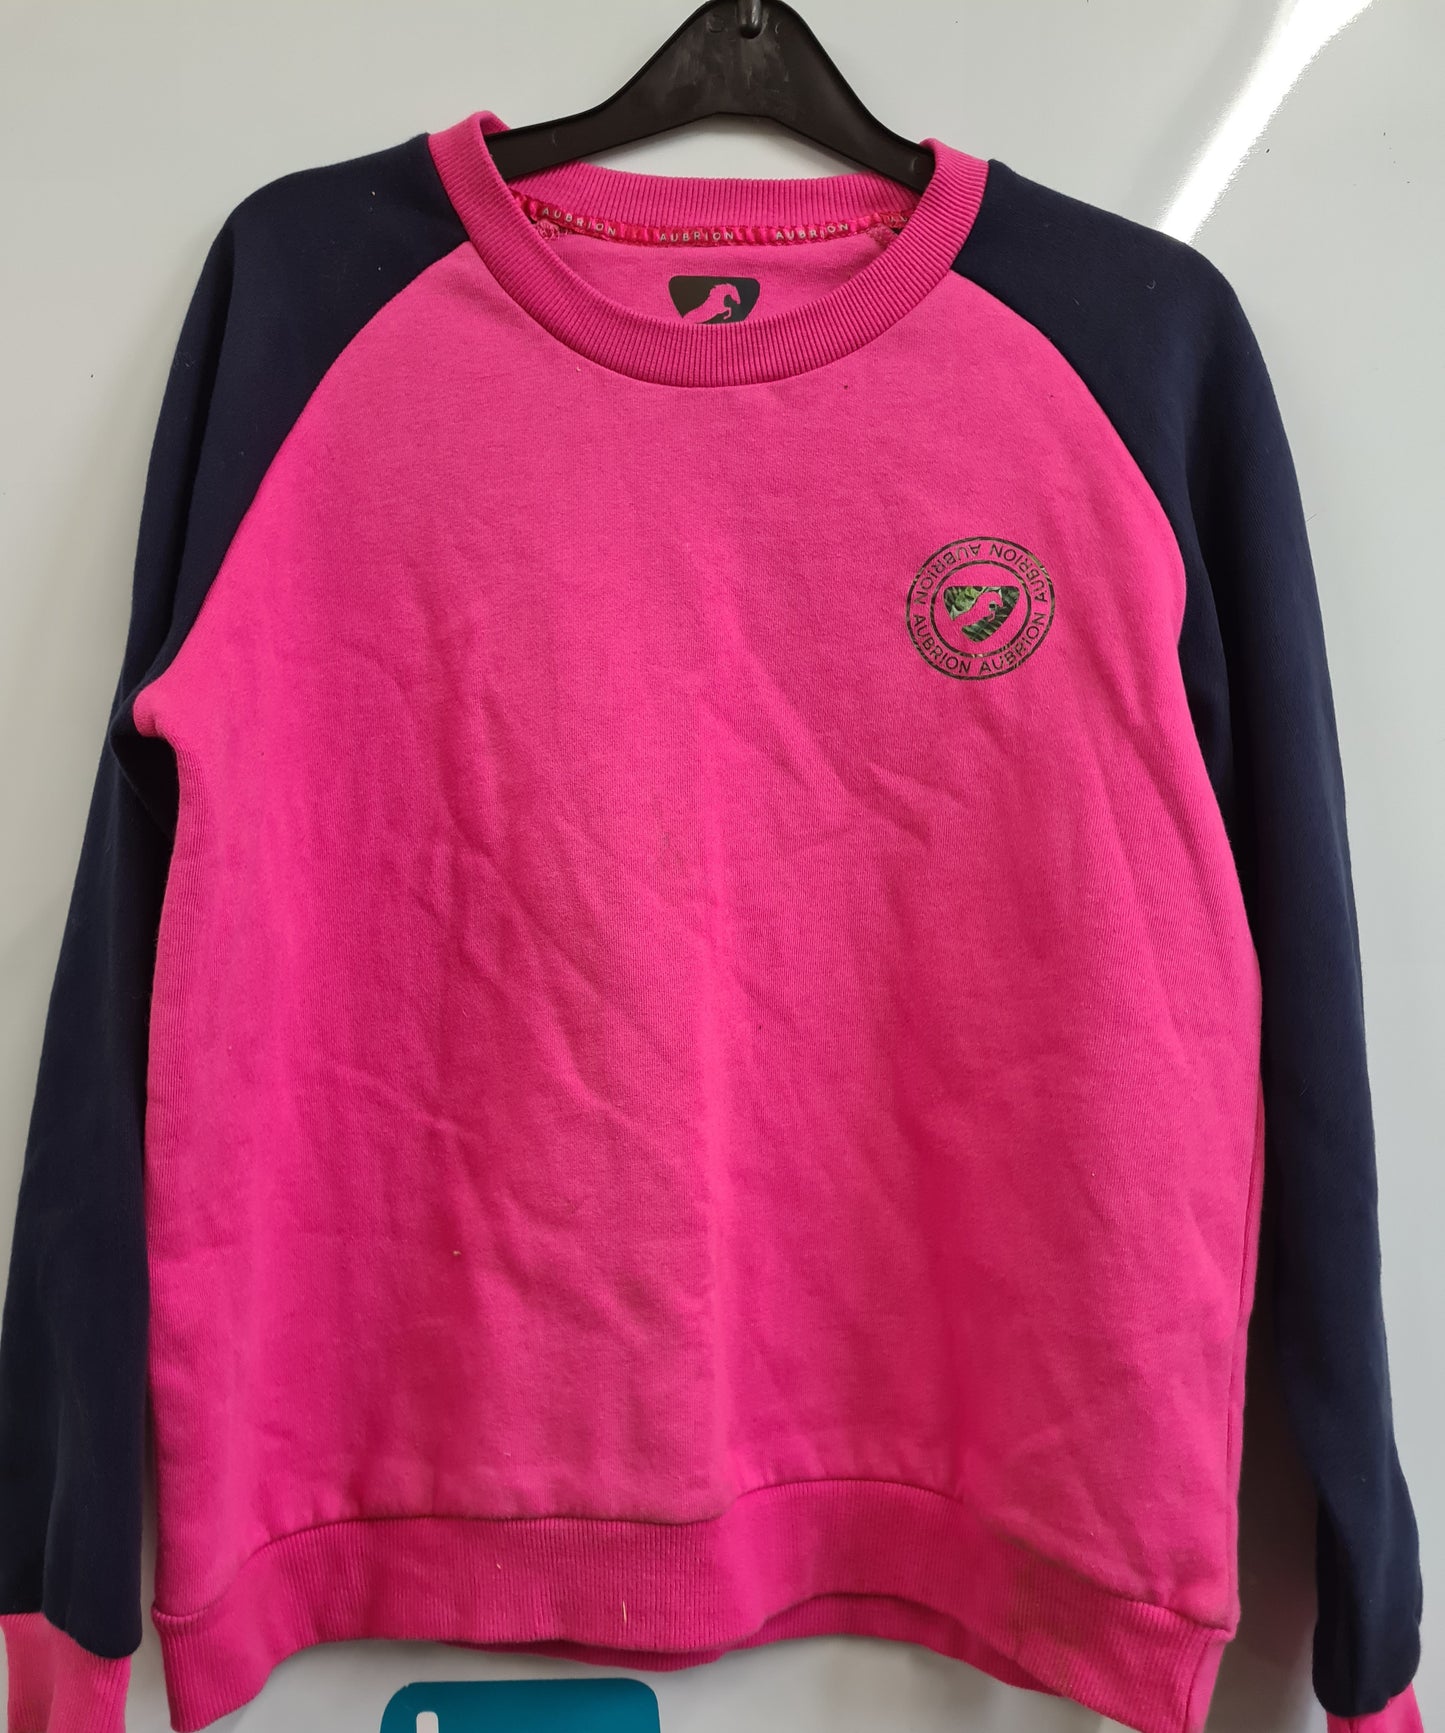 Used small size Aubrion pink and navy jumper FREE POSTAGE ✅